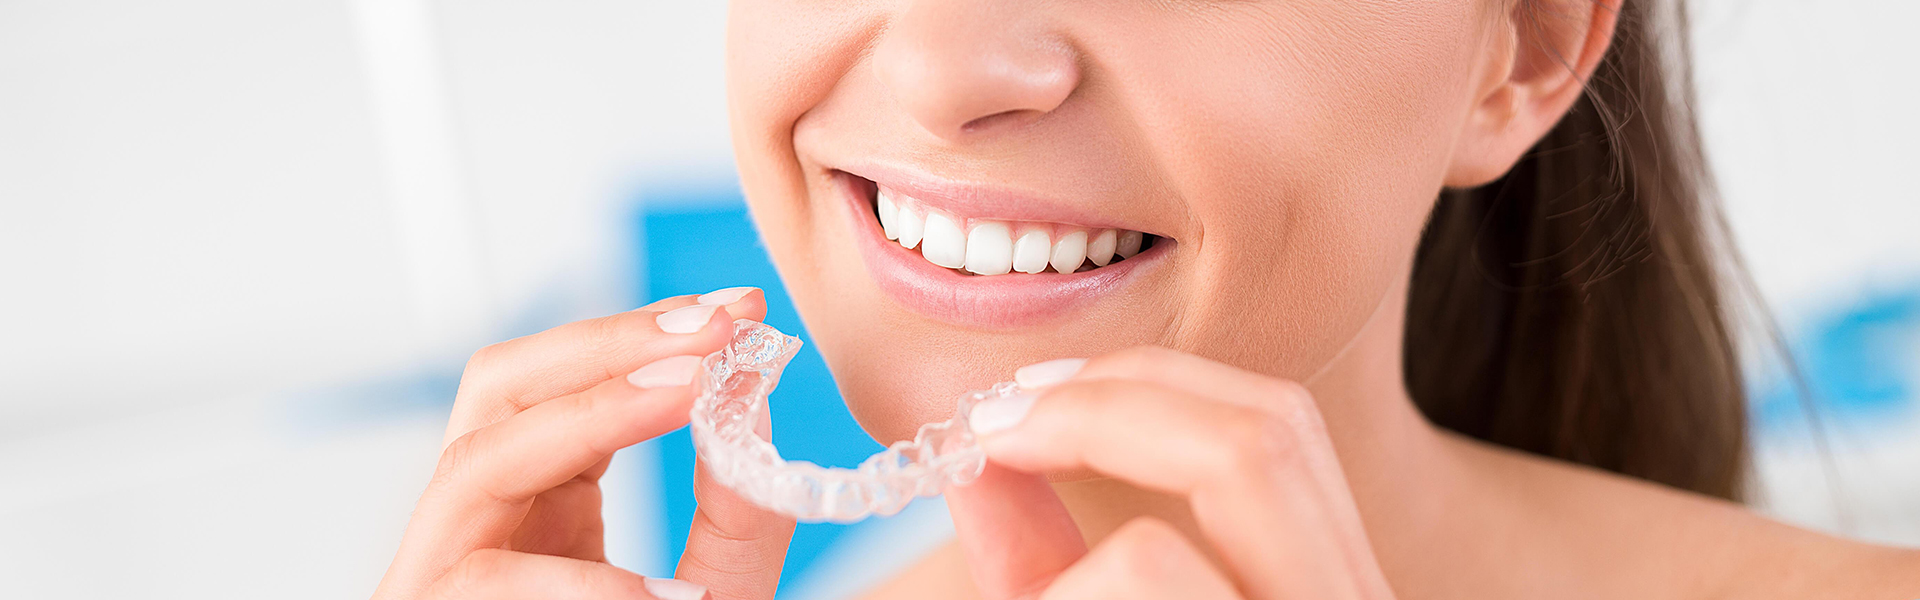 Teeth Straightening With Invisalign Popular Among Adults